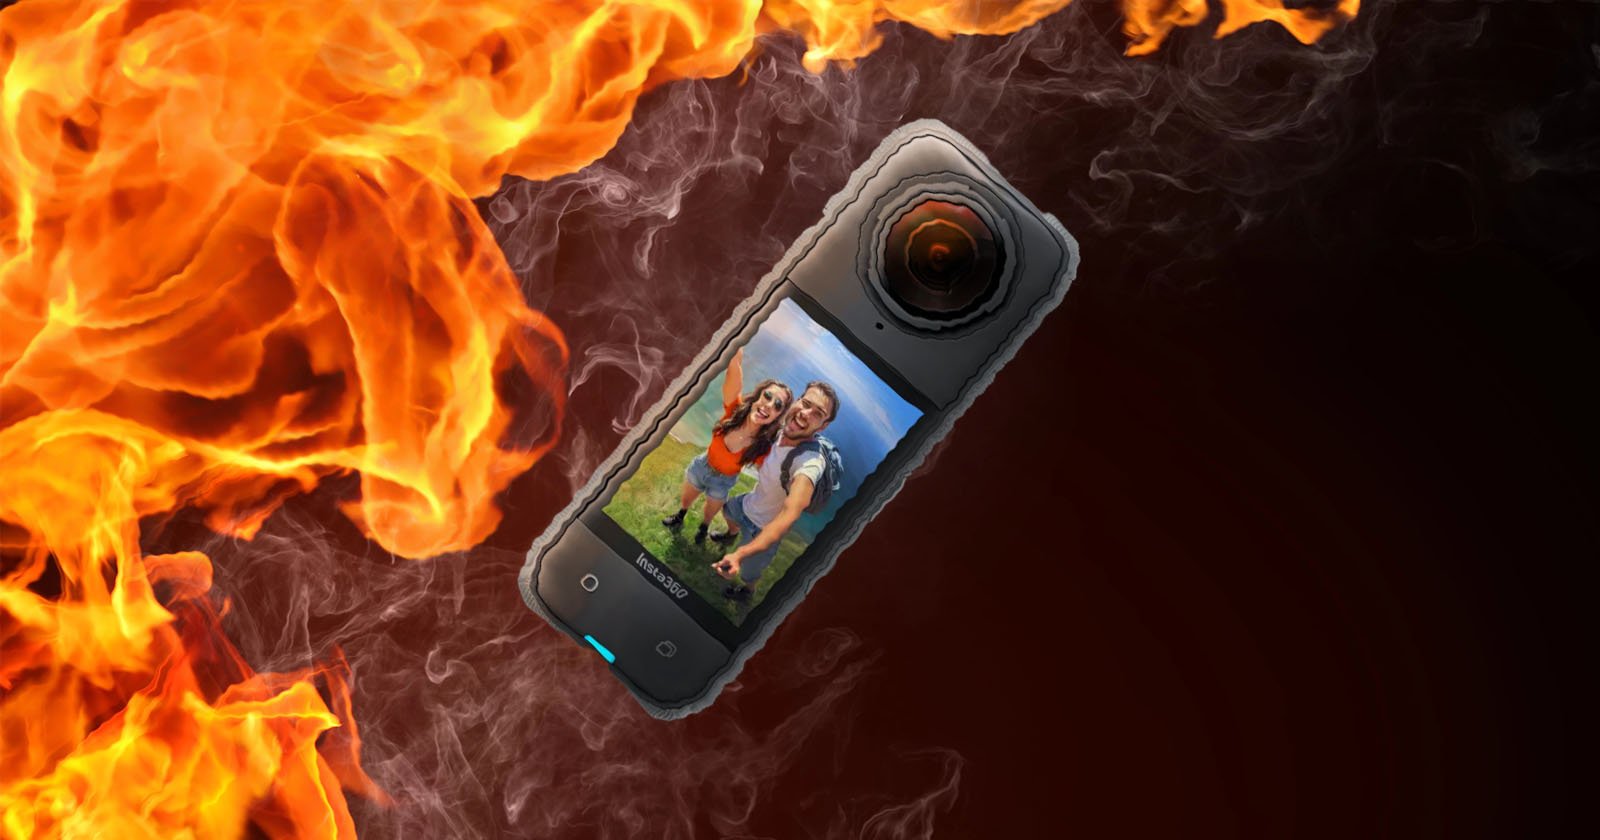 A smartphone displaying a photo of a smiling couple is engulfed in dramatic flames, illustrating a concept of data loss or damage.